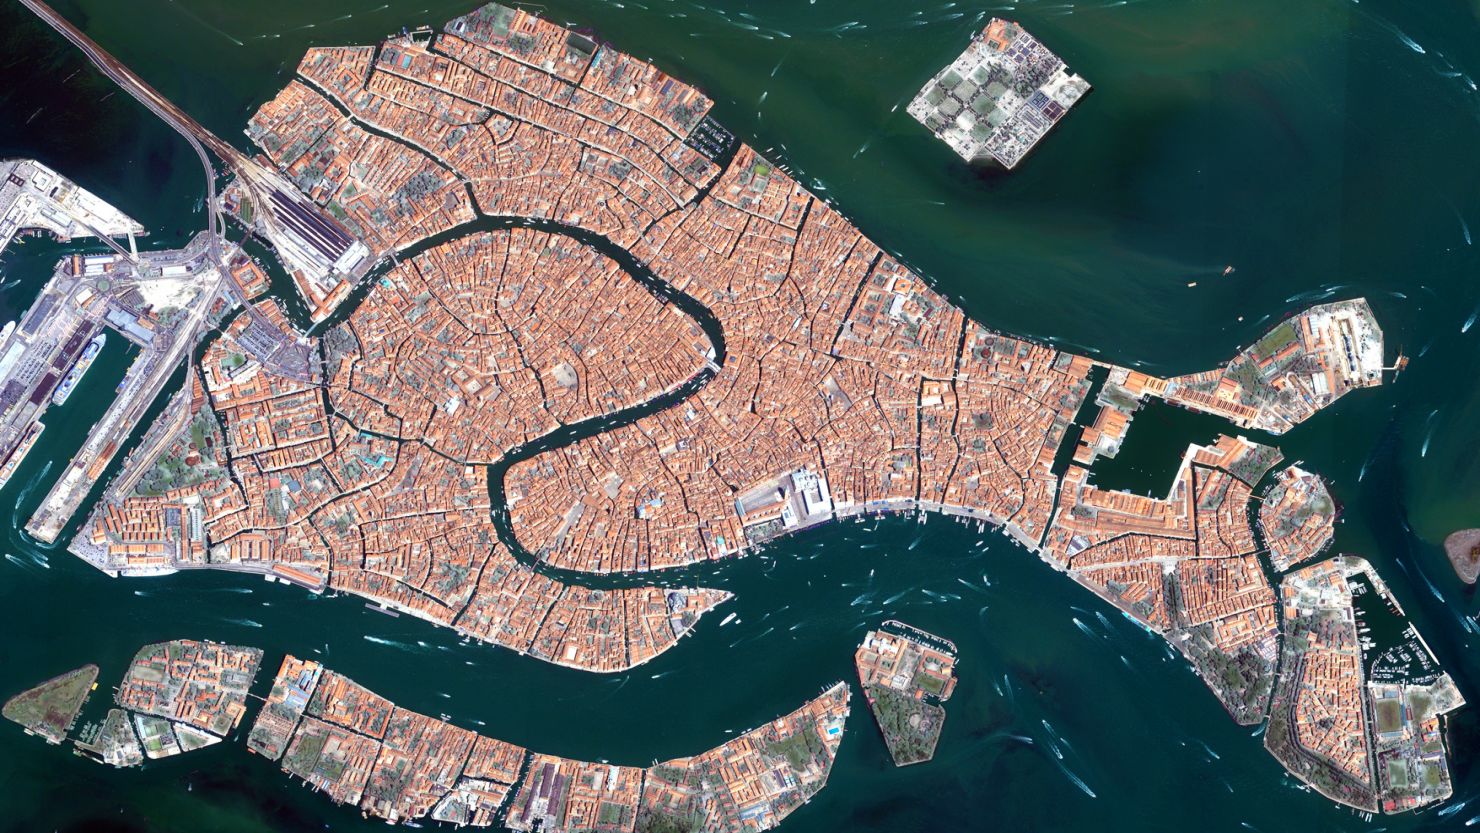 The city of Venice is investing billions in a new flood defence system to protect against sea level rises